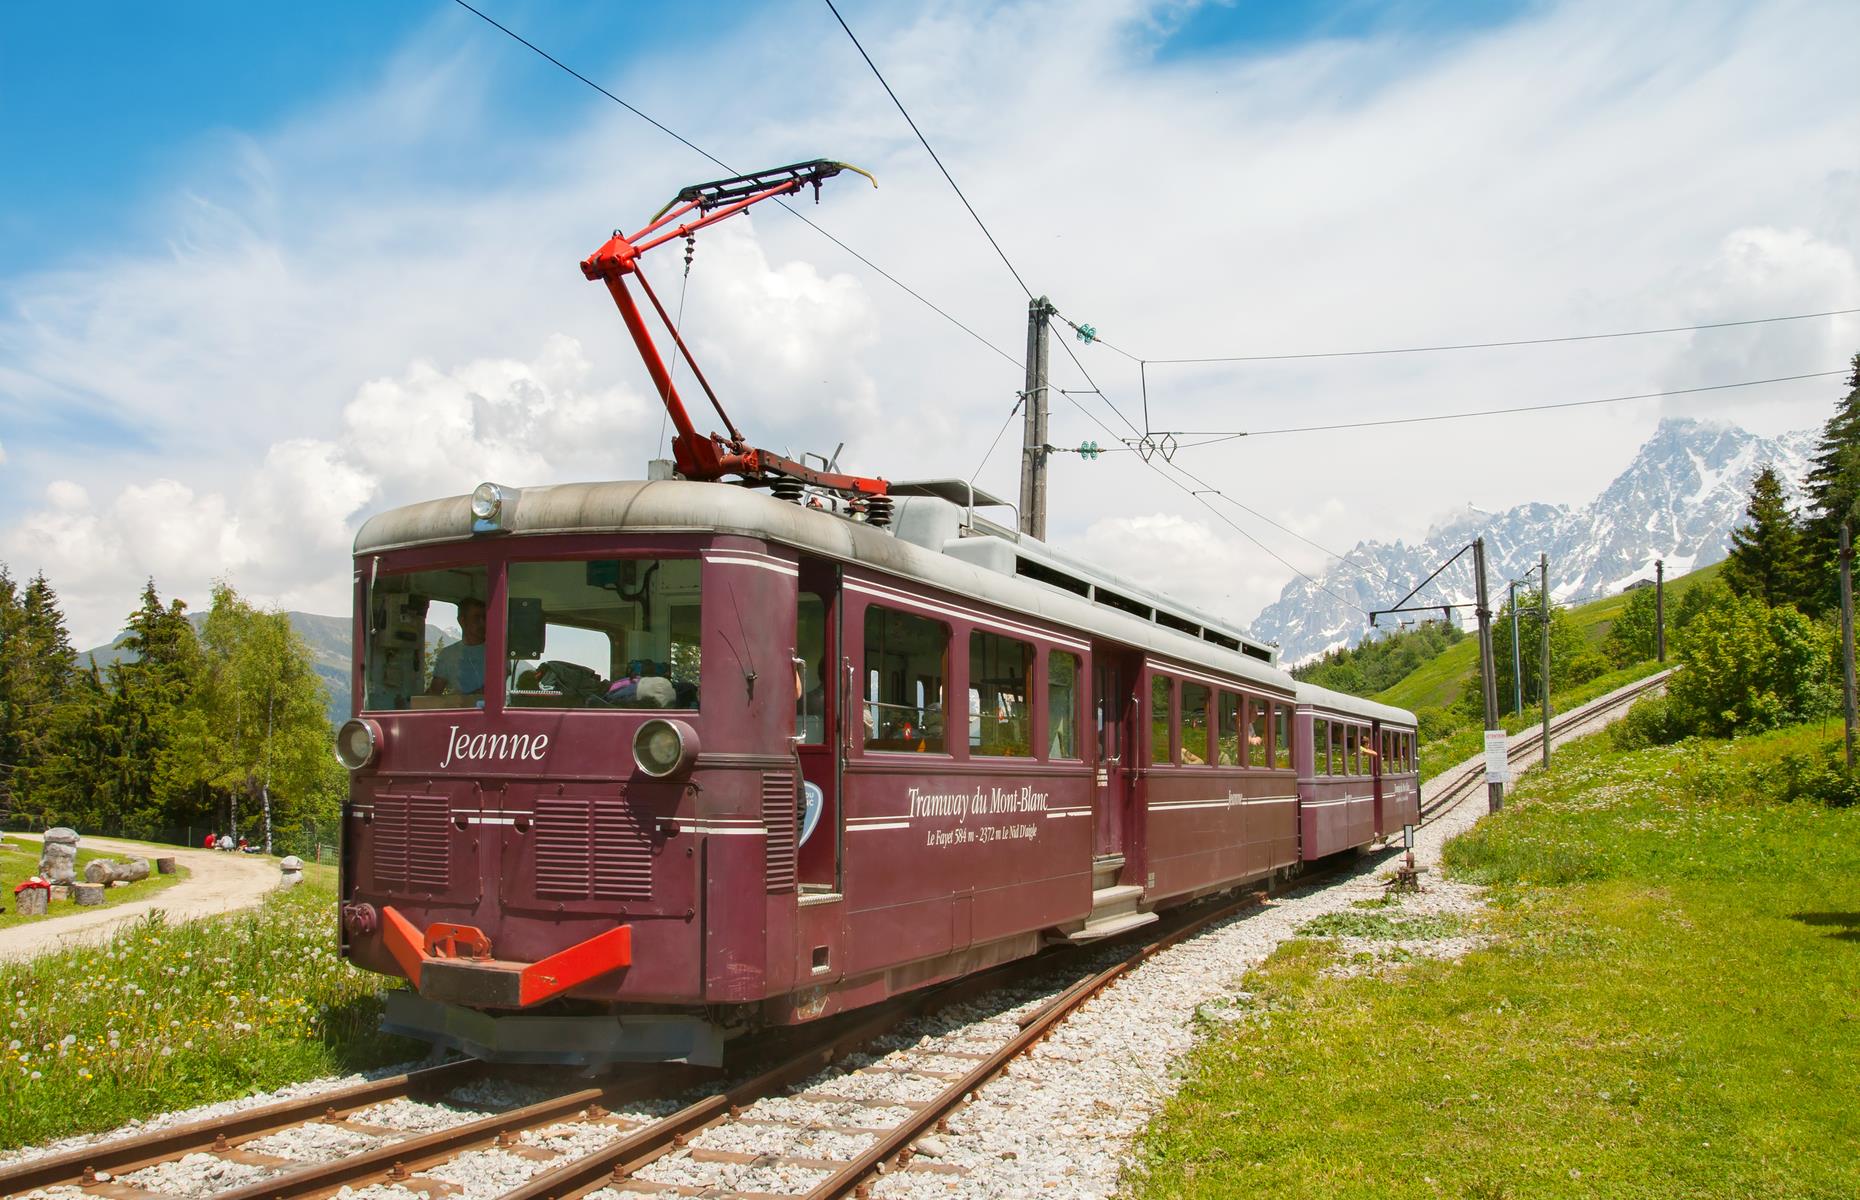 <p>Tackle a chunk of Western Europe’s highest peak (Mont Blanc towers over the Alps at 15,771 feet/4,807m) on France’s highest rack-and-pinion railway. In the summer months, the Tramway du Mont Blanc climbs all the way from St-Gervais-les-Bains to Nid d’Aigle, at 7,792 feet (2,375m). The one-hour ascent allows plenty of time to savor the views of lush pasture, snow-capped peaks and the Bionnassay glacier. From here on, you’ll need proper kit and determination to make the final climb to the top.</p>  <p><strong>Liking this? Click on the Follow button above for more great stories from loveEXPLORING</strong></p>